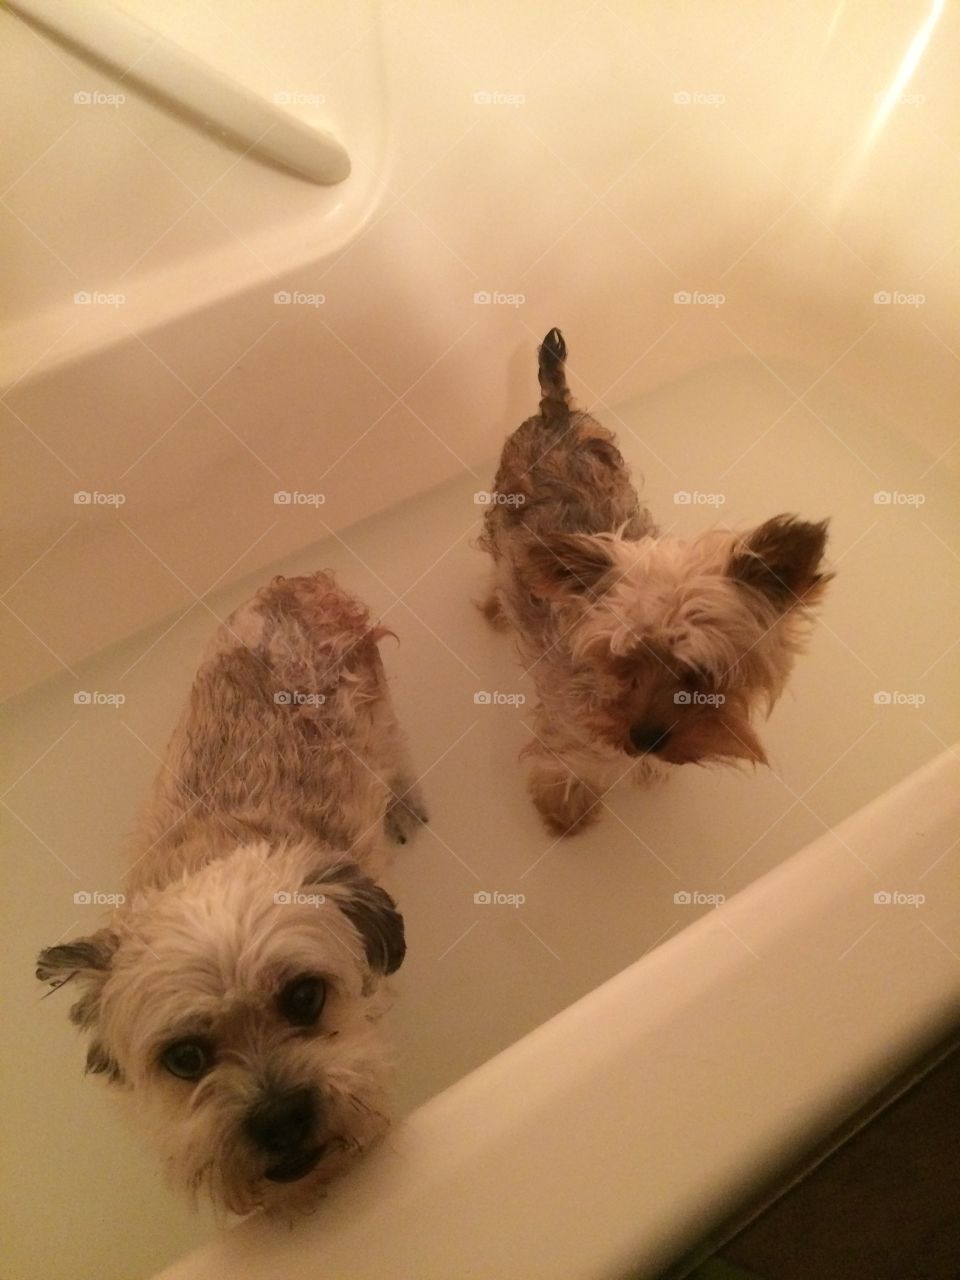 Bath time for these two pups 